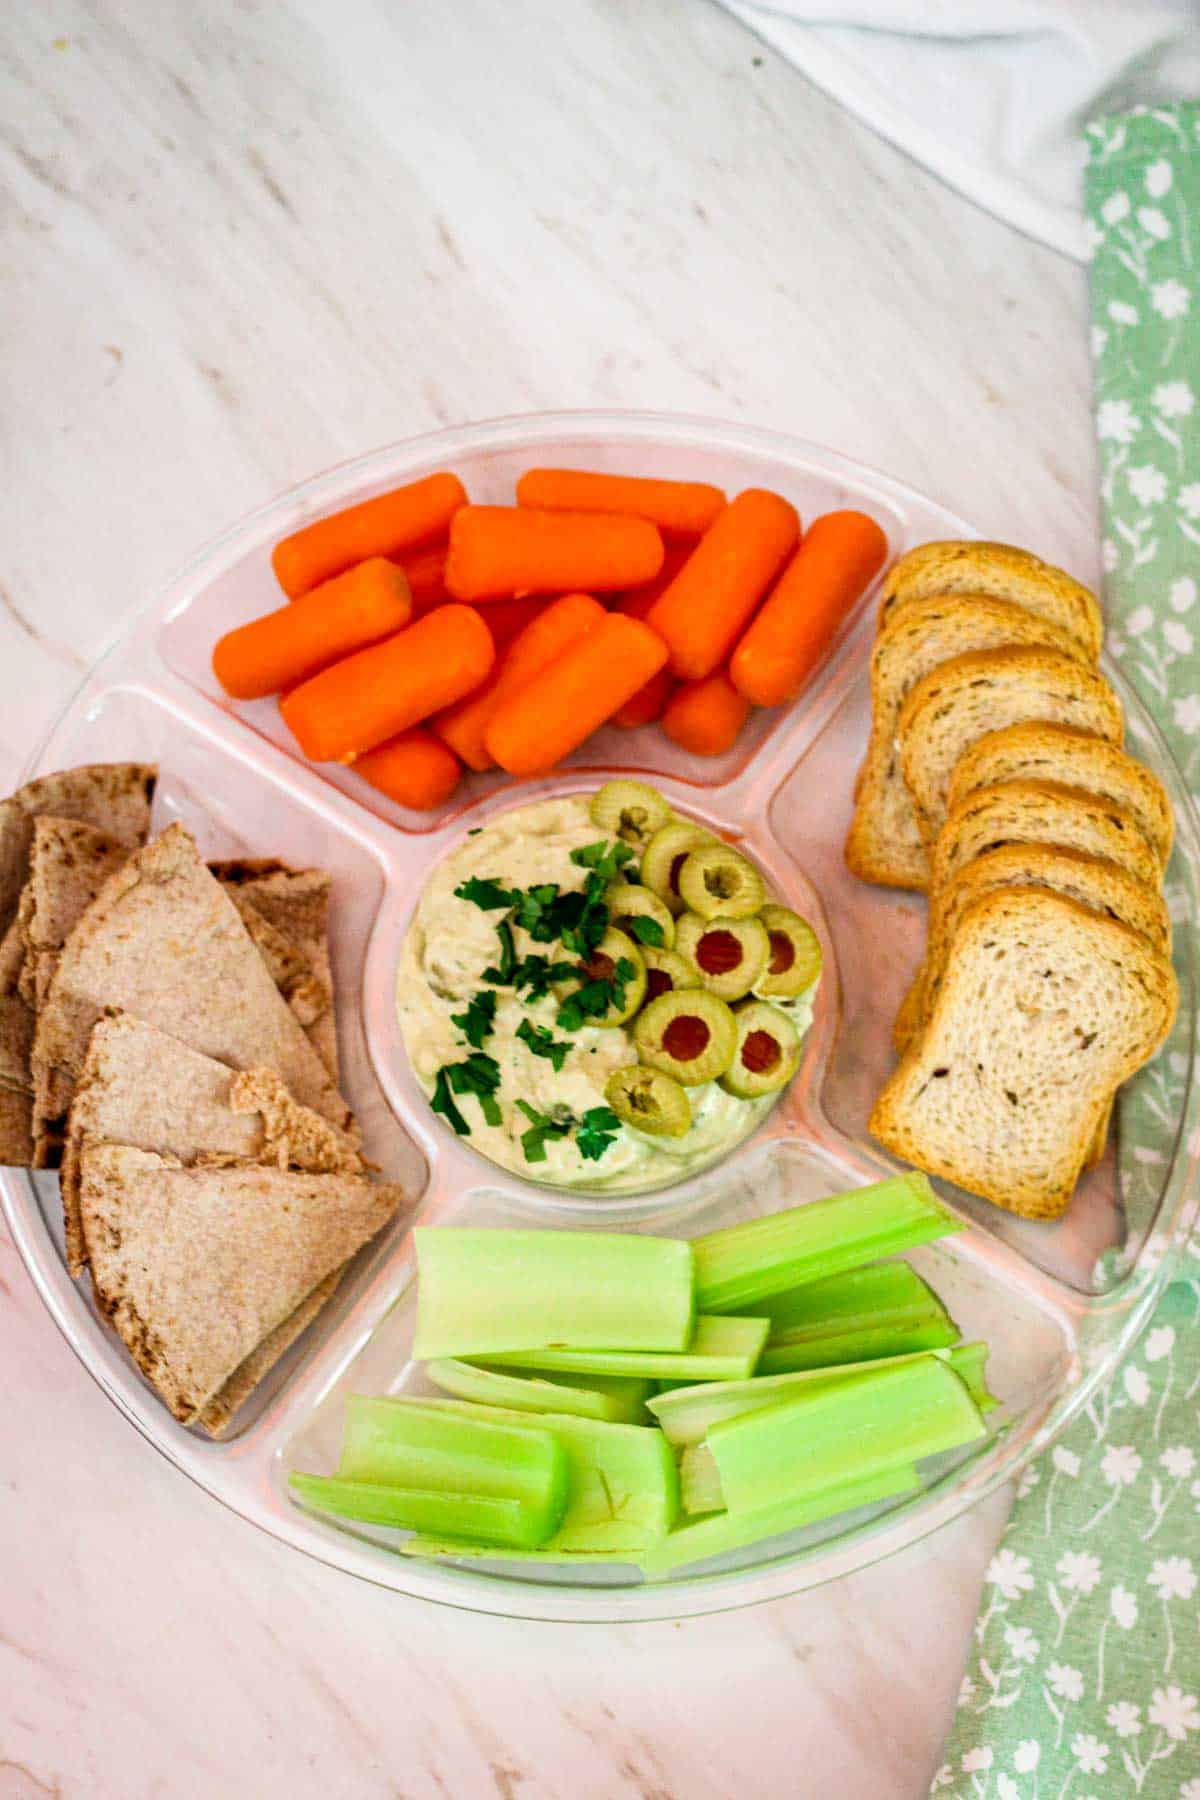 Tuna dip with tarragon served with carrots, celery, pita bread and crostini while garnished with parsley and olive slices. 